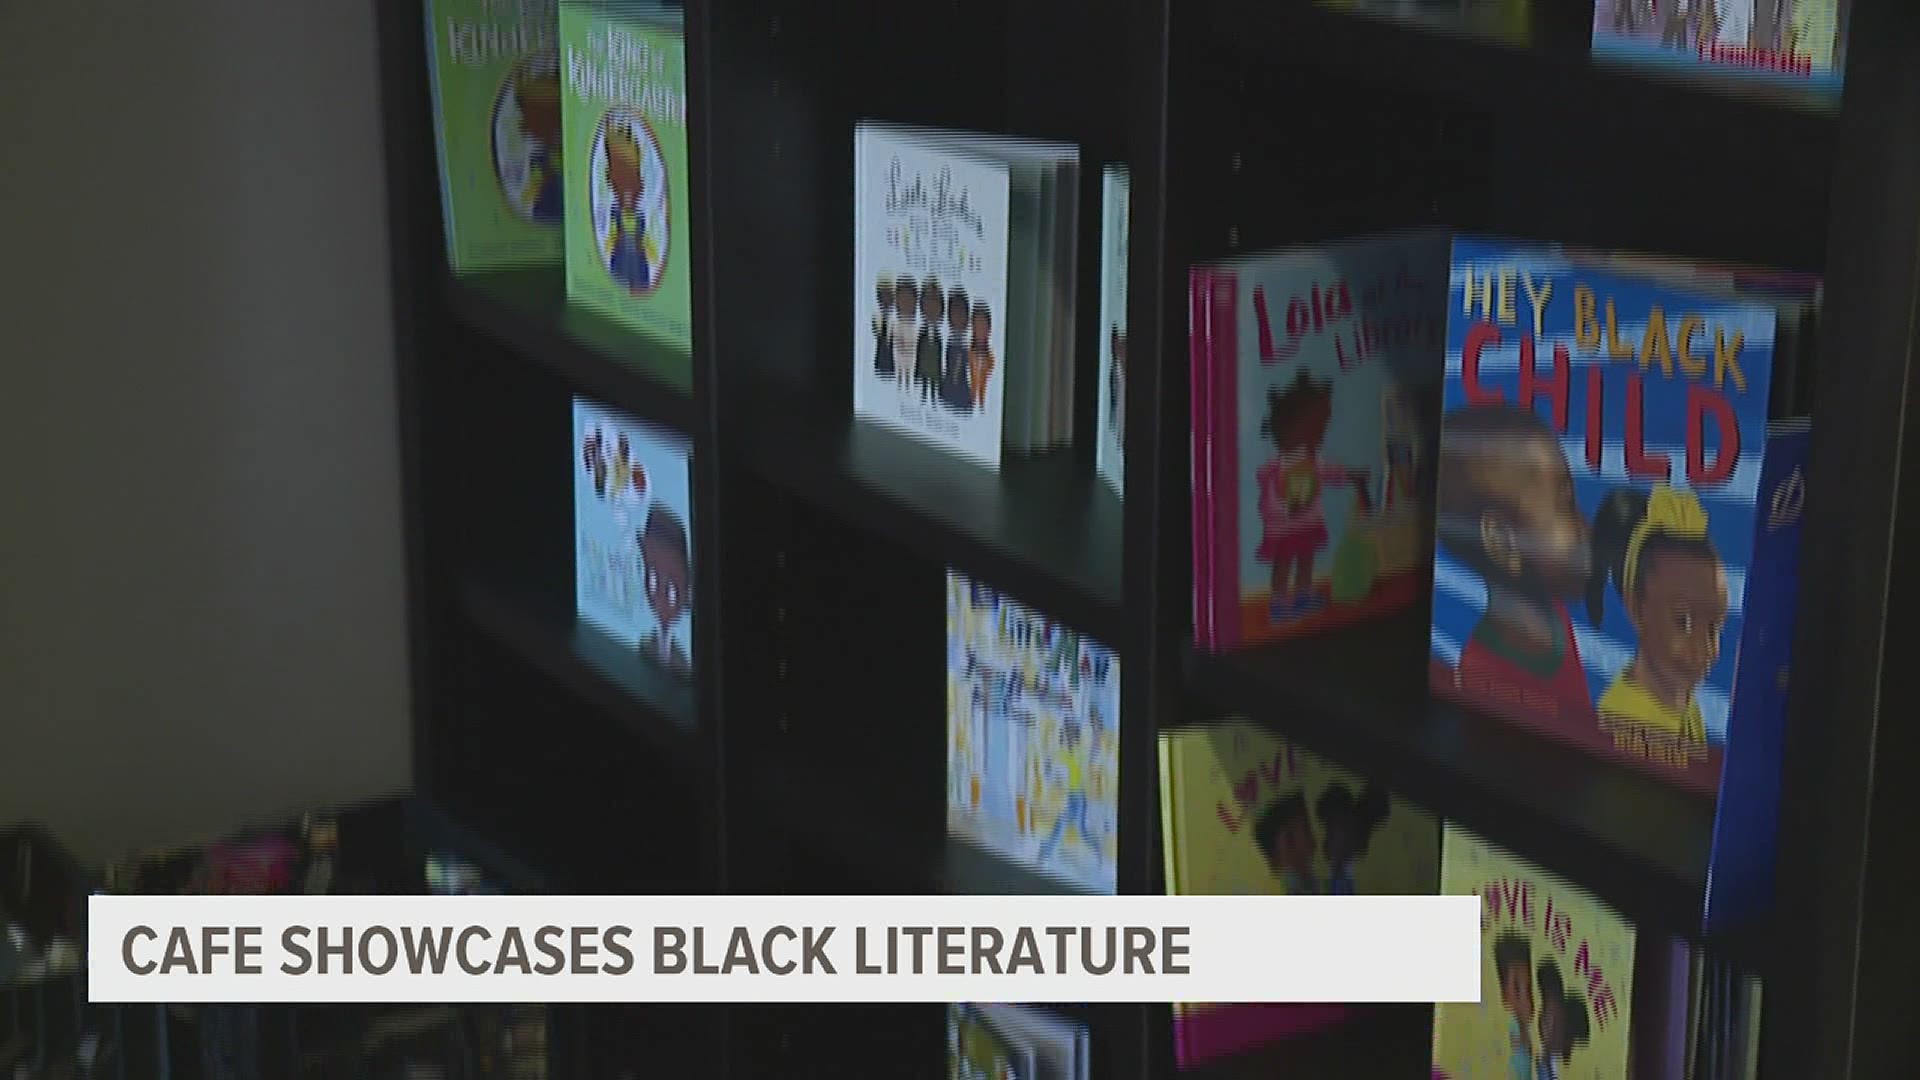 The owner claims the shop is one of the first black-owned bookstore coffee shops in the city.